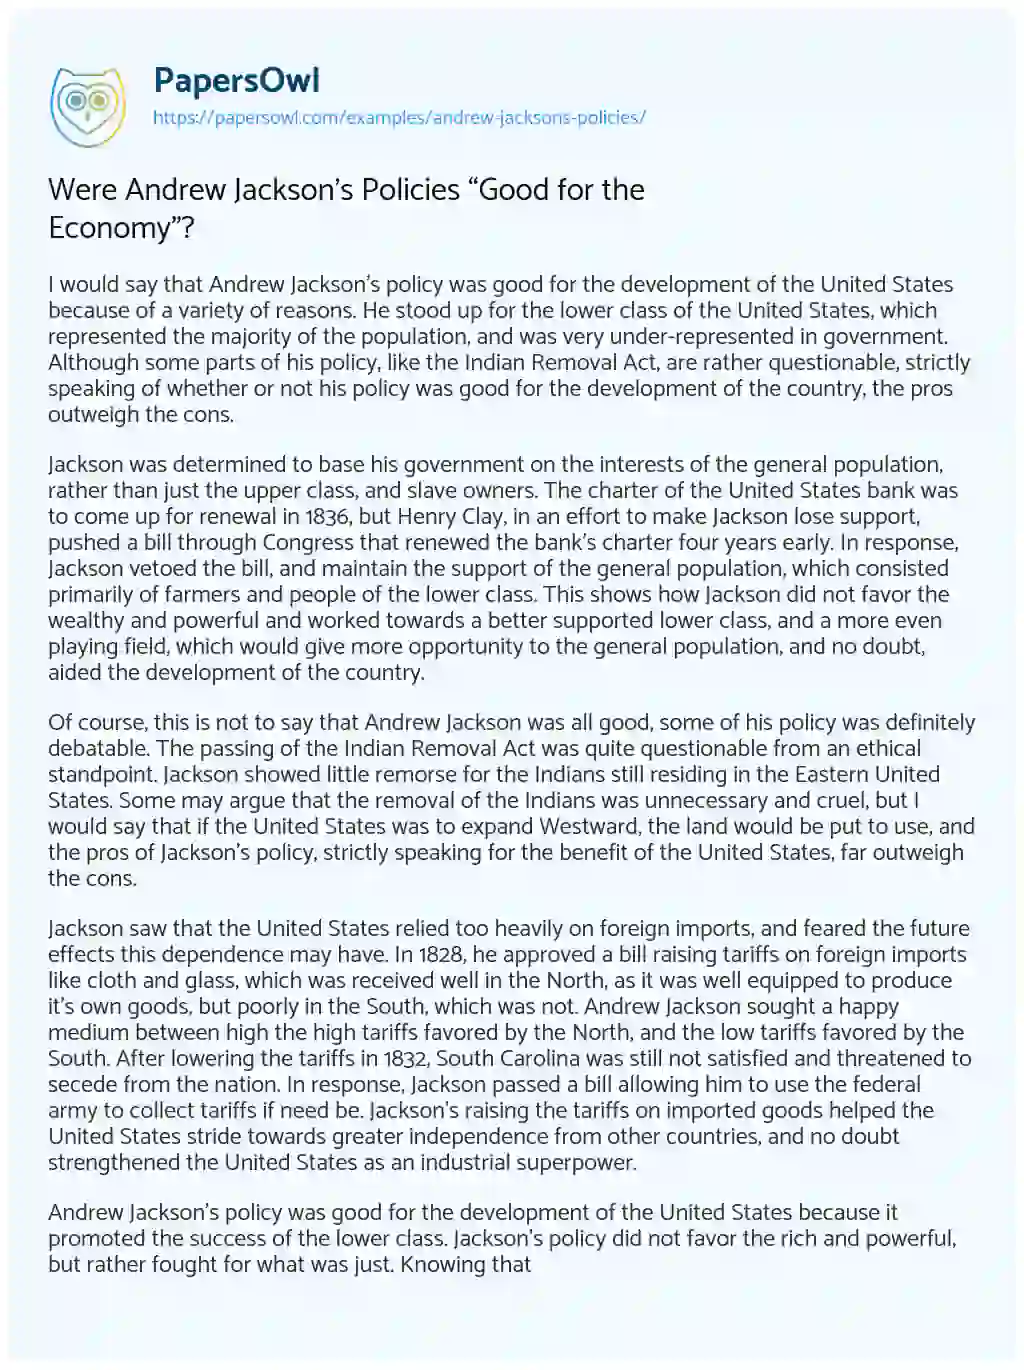 Essay on Were Andrew Jackson’s Policies “Good for the Economy”?